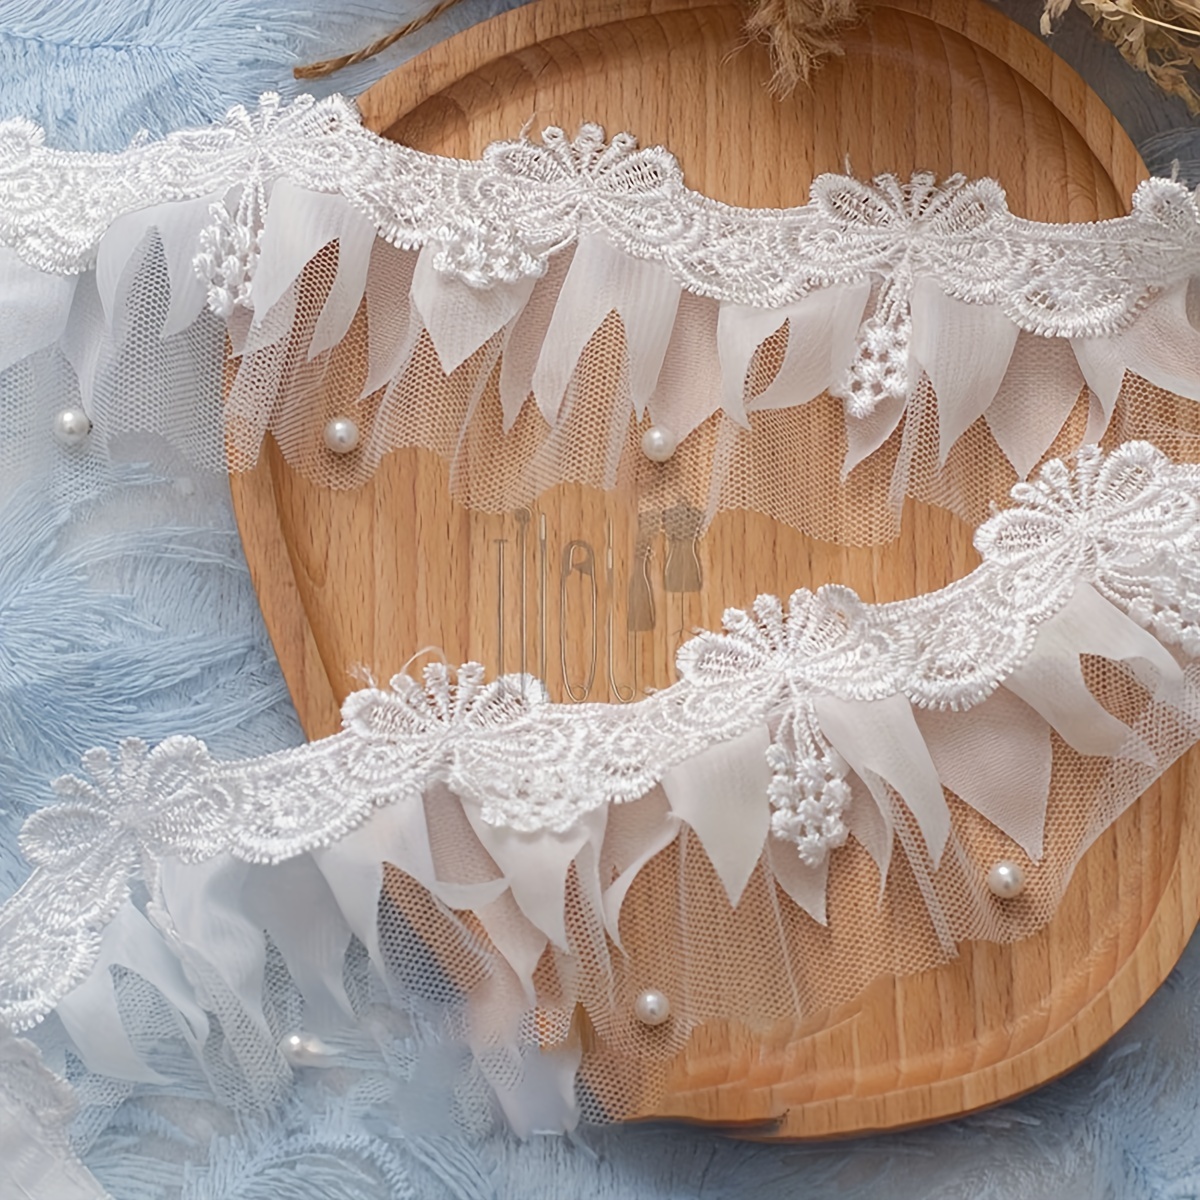 

Classic Butterfly Lace Trim - 2 Yards X 7cm, Chiffon Pleated With Bead Accents For Collars, Skirts, Curtains, Wedding Dresses & Accessories